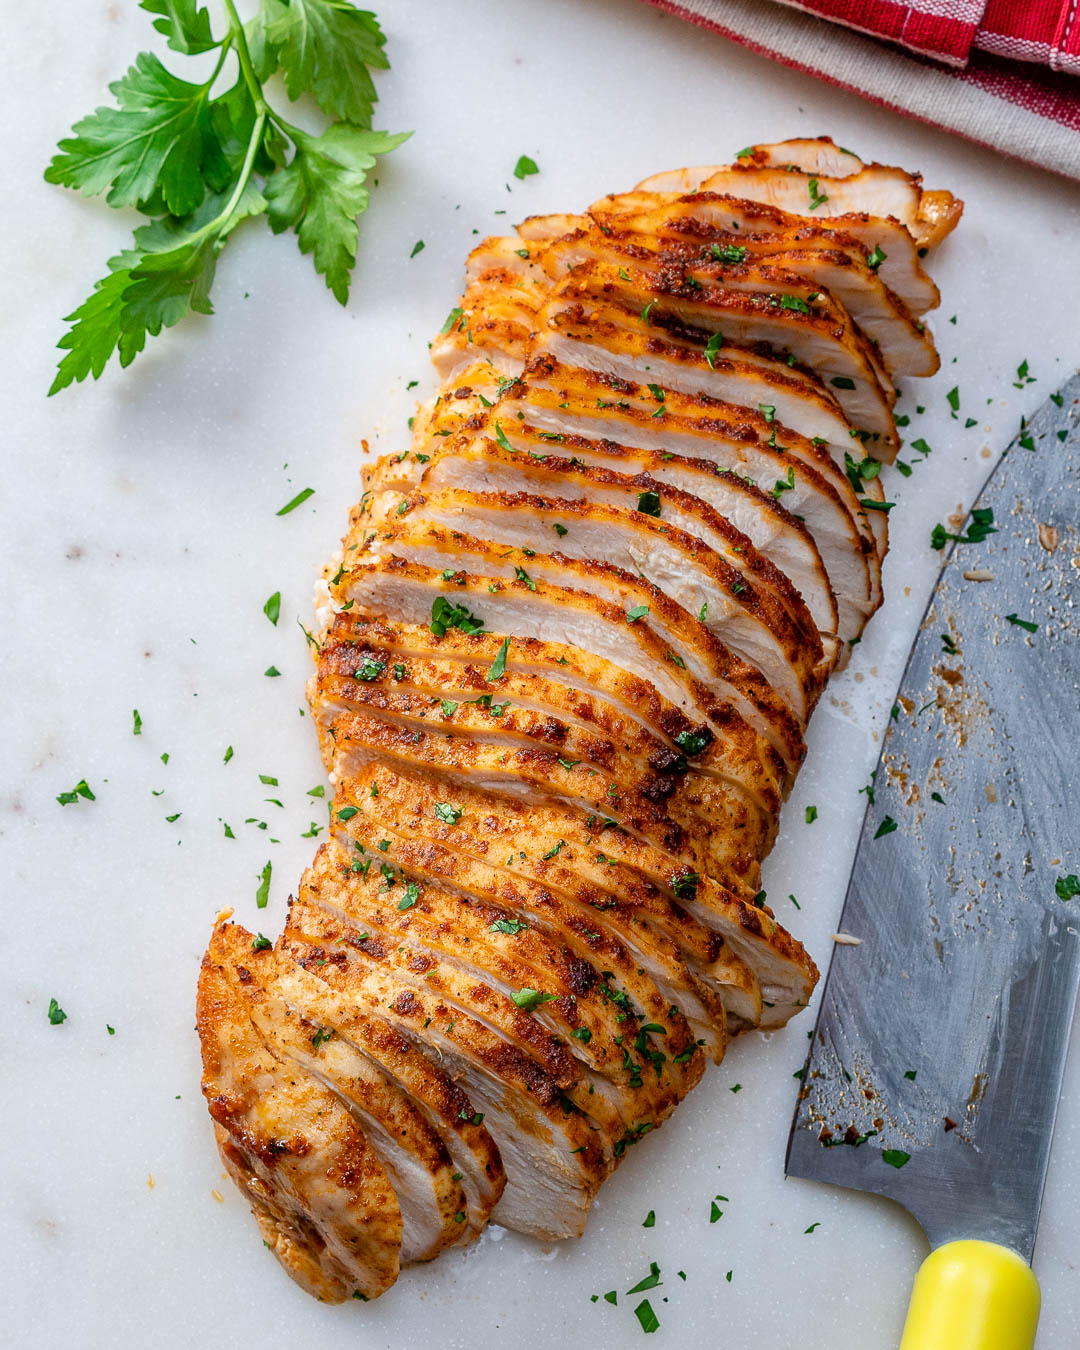 How to Make Perfect Juicy Baked Chicken Breasts Everytime ...